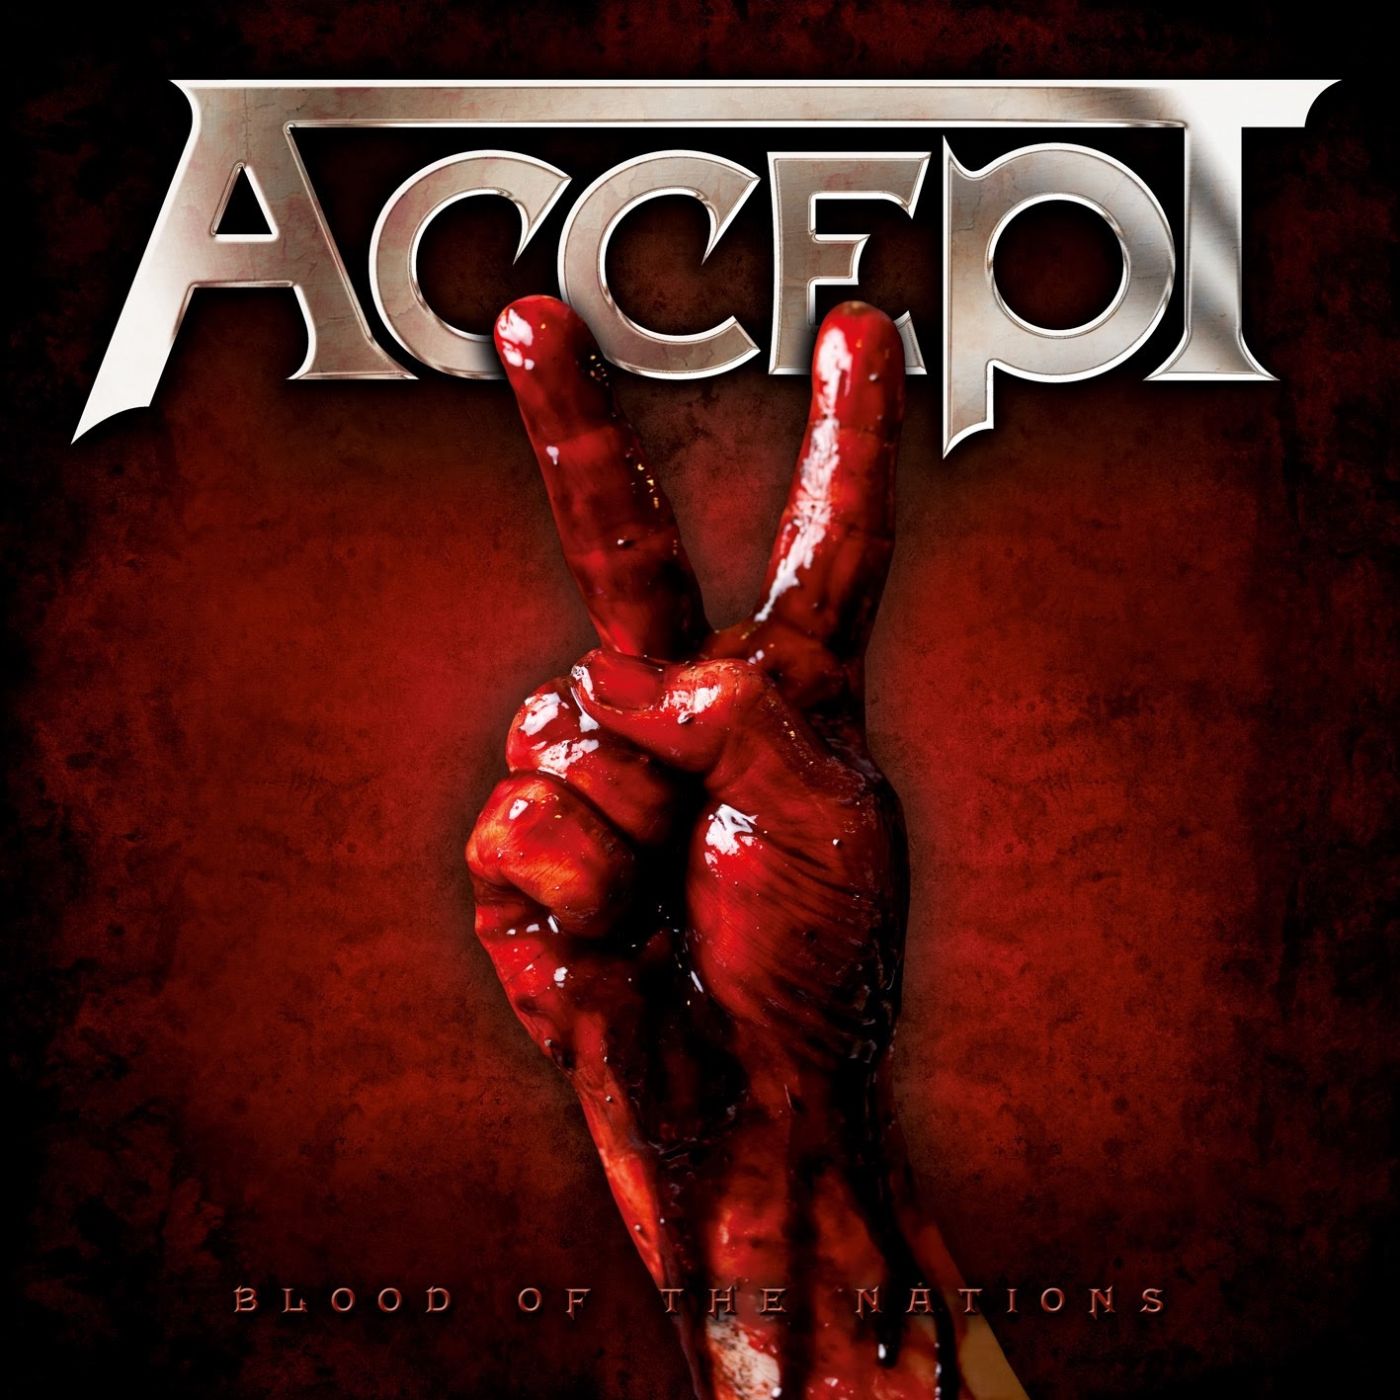 Art for Pandemic by Accept